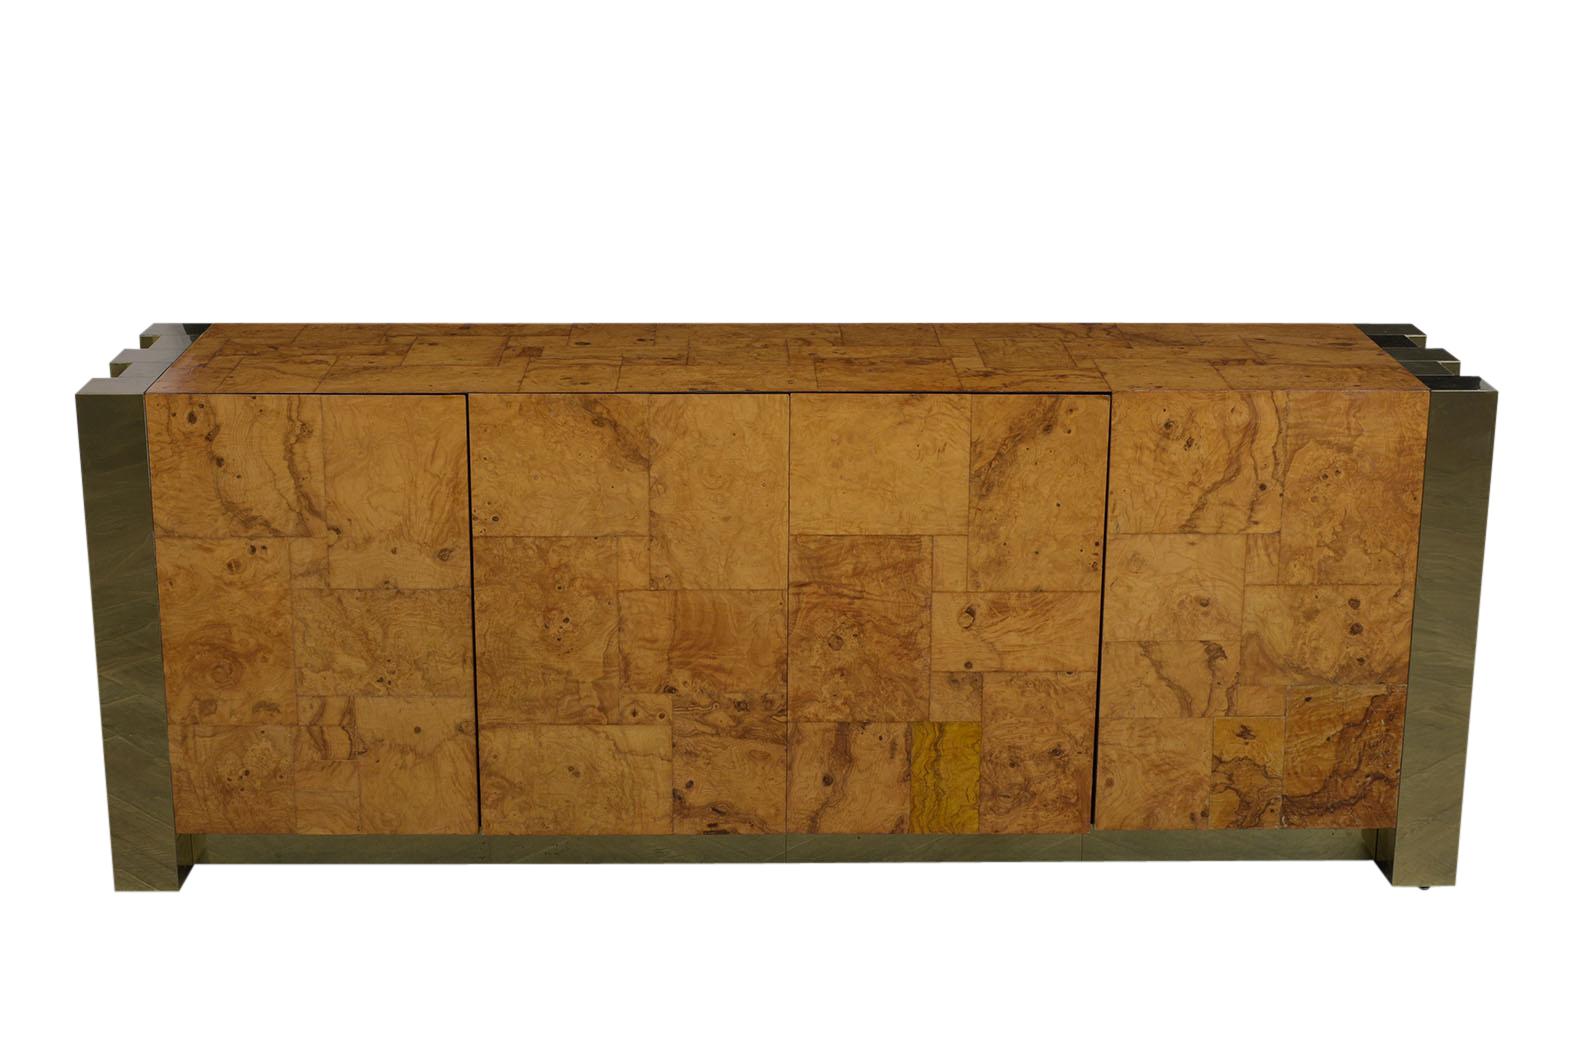 This 1970s Cityscape Credenza designed by Paul Evans has been newly restored, features it's original large brass accents along the sides/bottom, and its original golden finish. This magnificent piece is covered in an elegant burled wood veneer, has